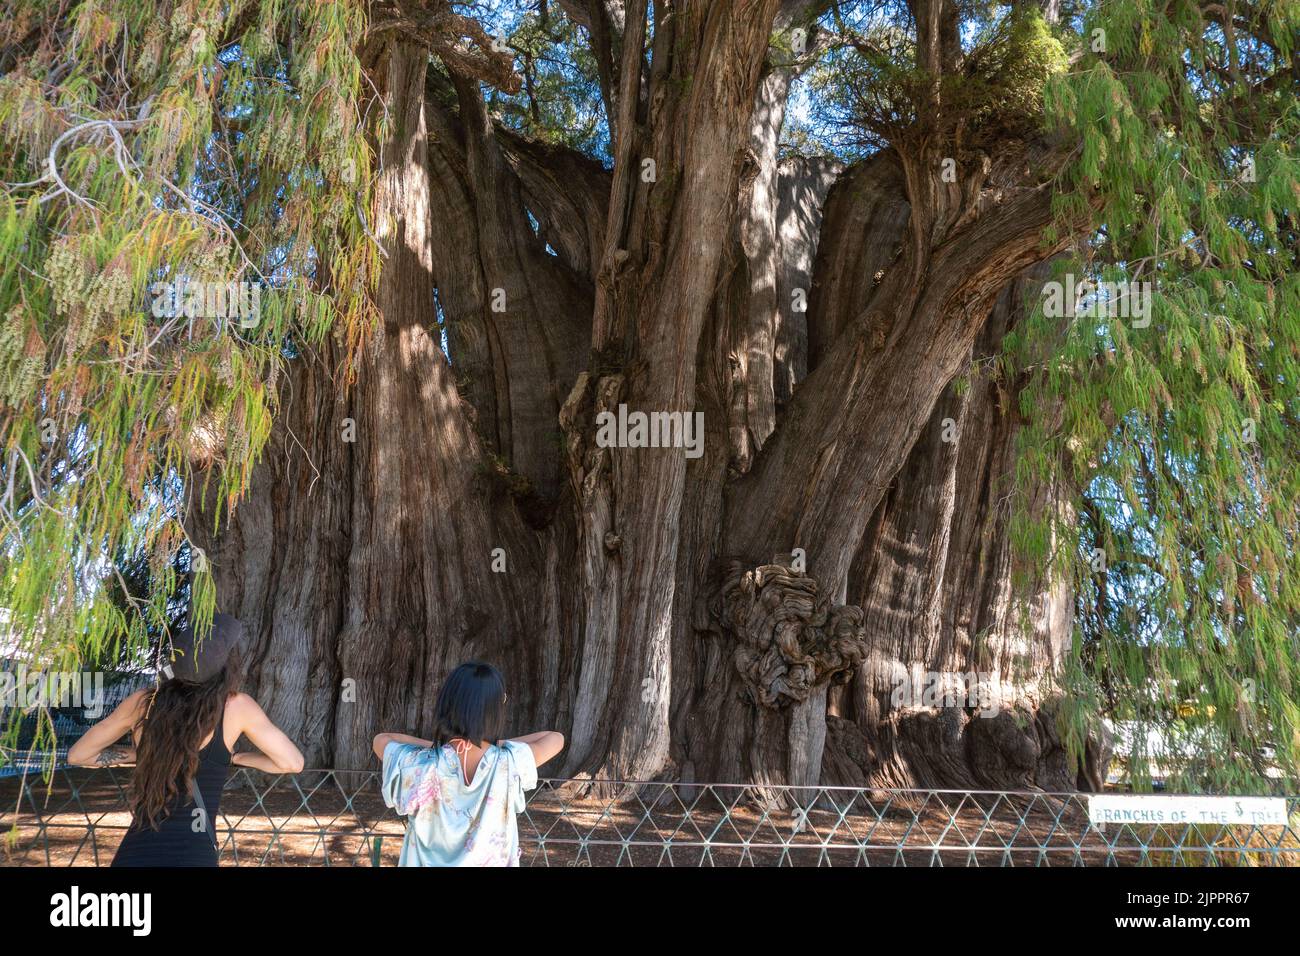 The Tule tree from Santa Maria del Tule, Mexico. The Biggest tree in Latin America is over 2000 years old Stock Photo